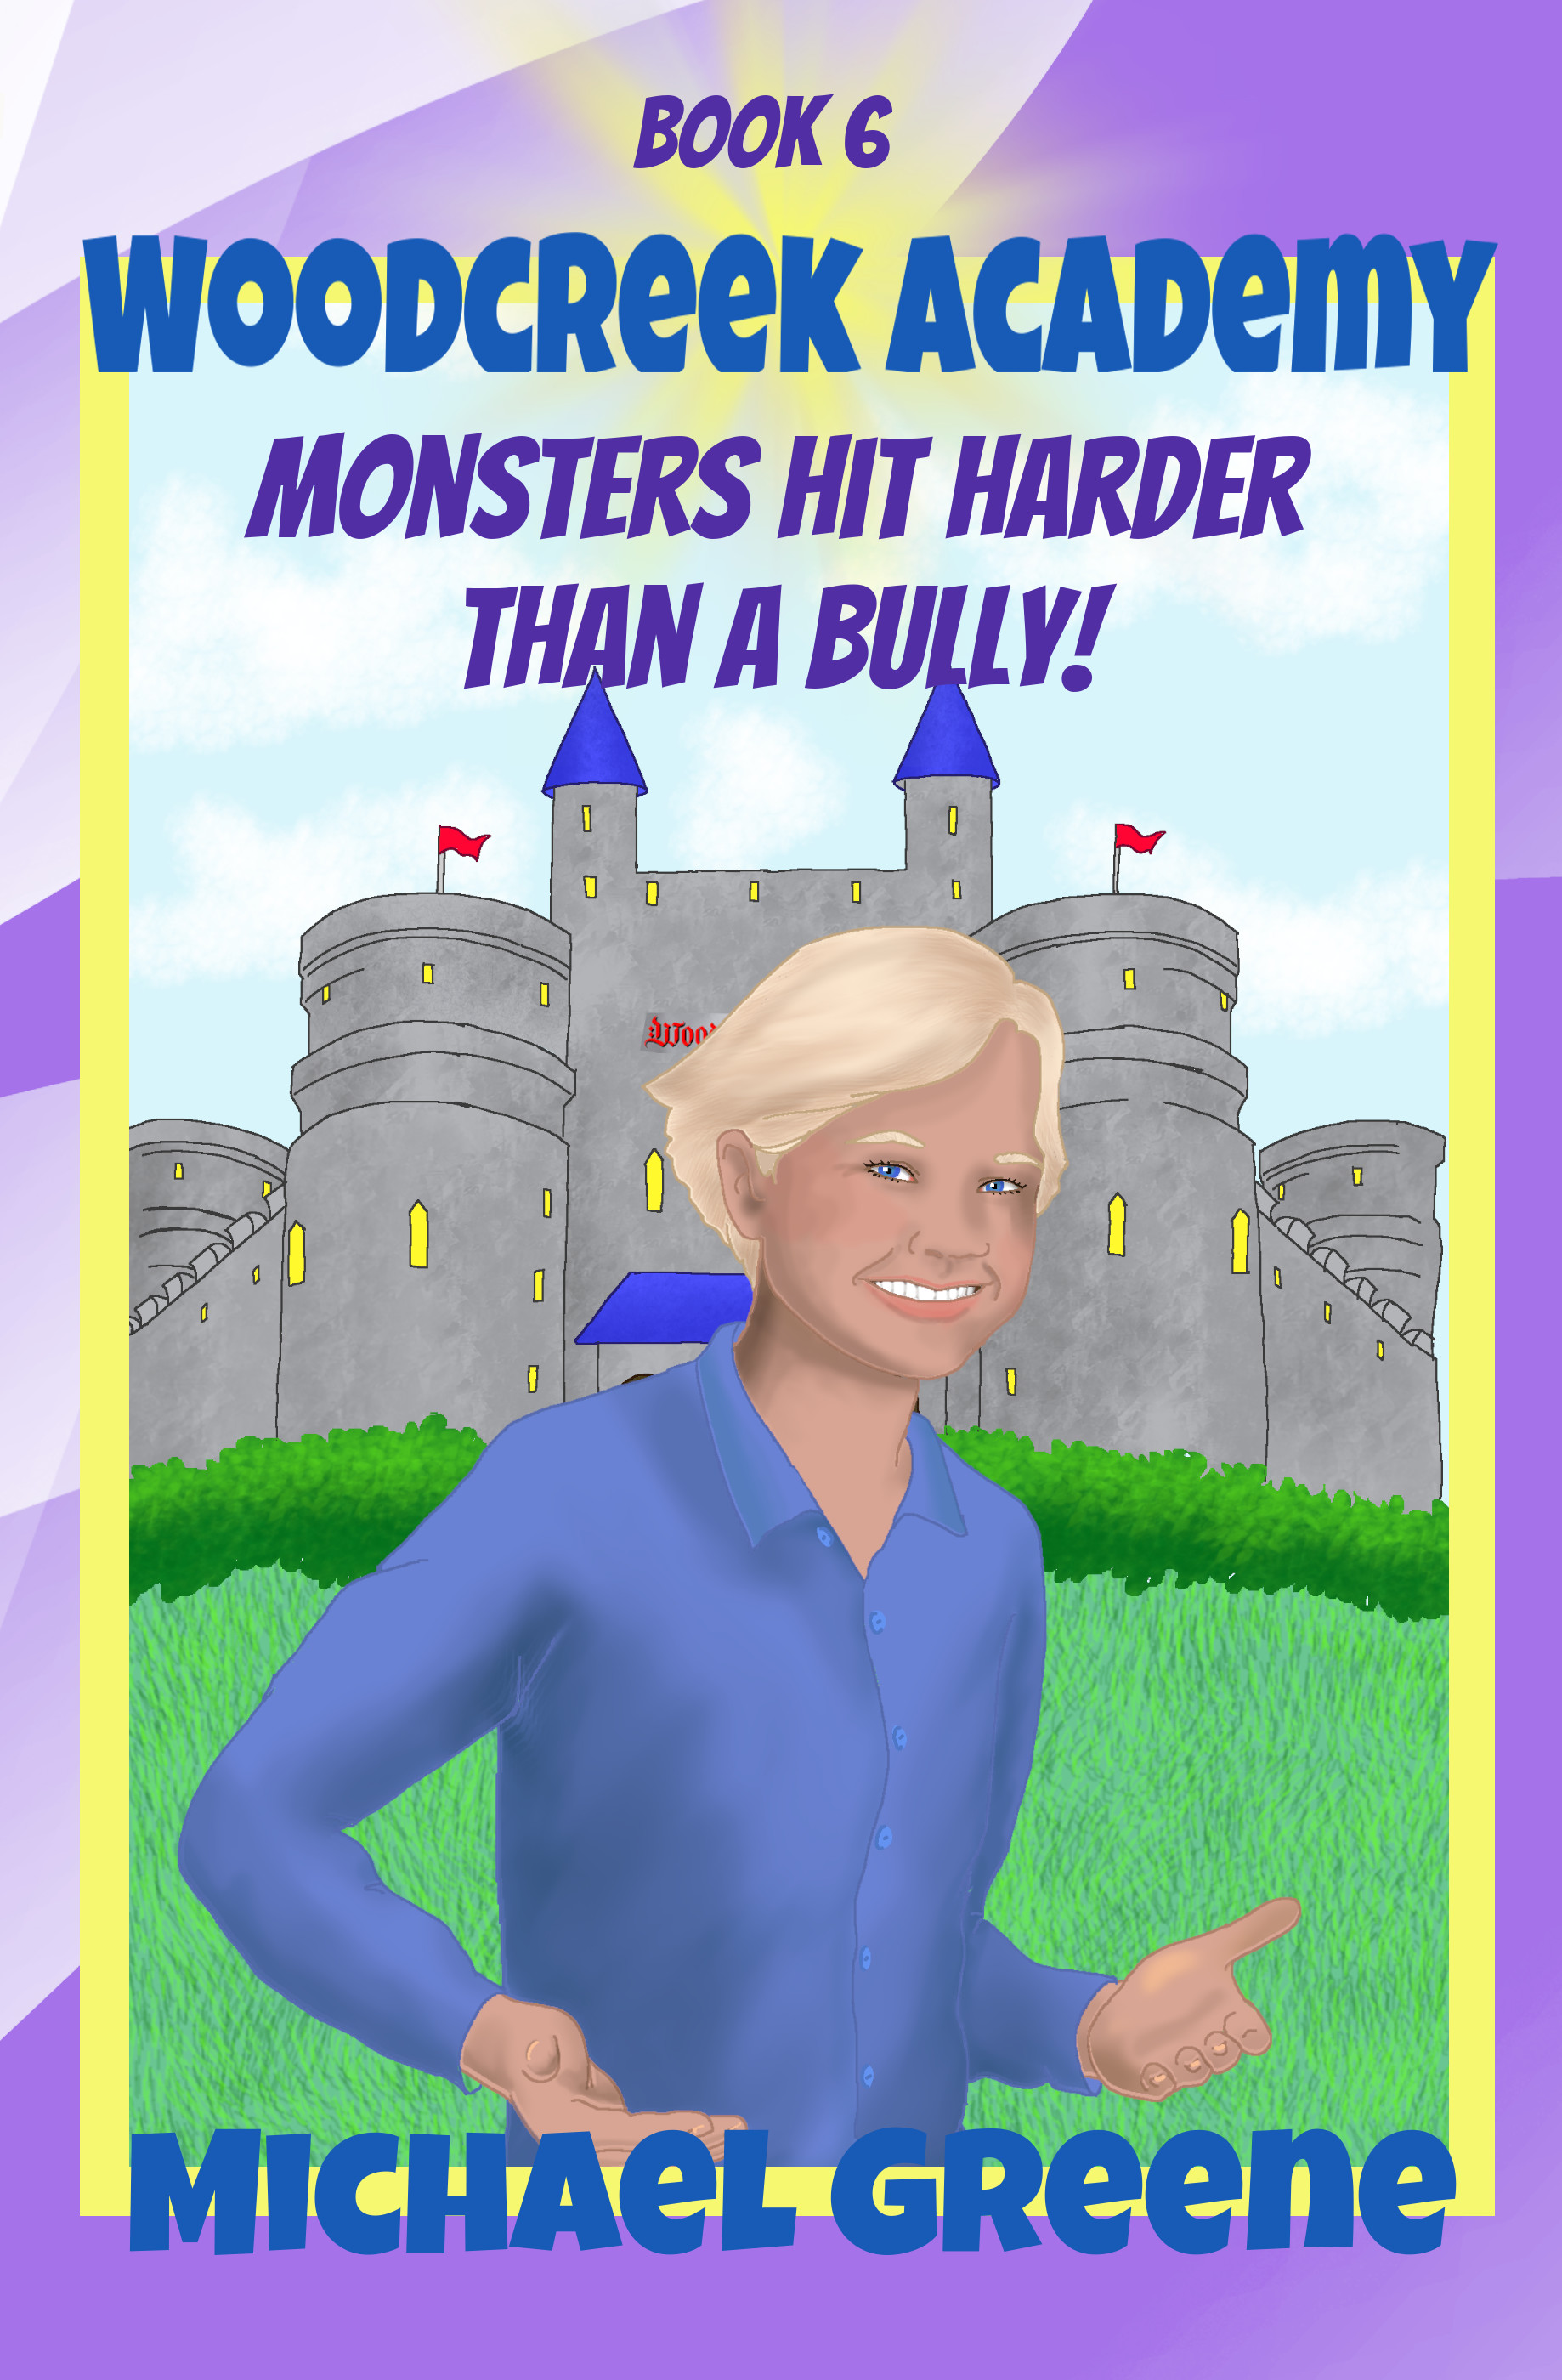 Woodcreek Academy 6: Monsters Hit Harder than a Bully!